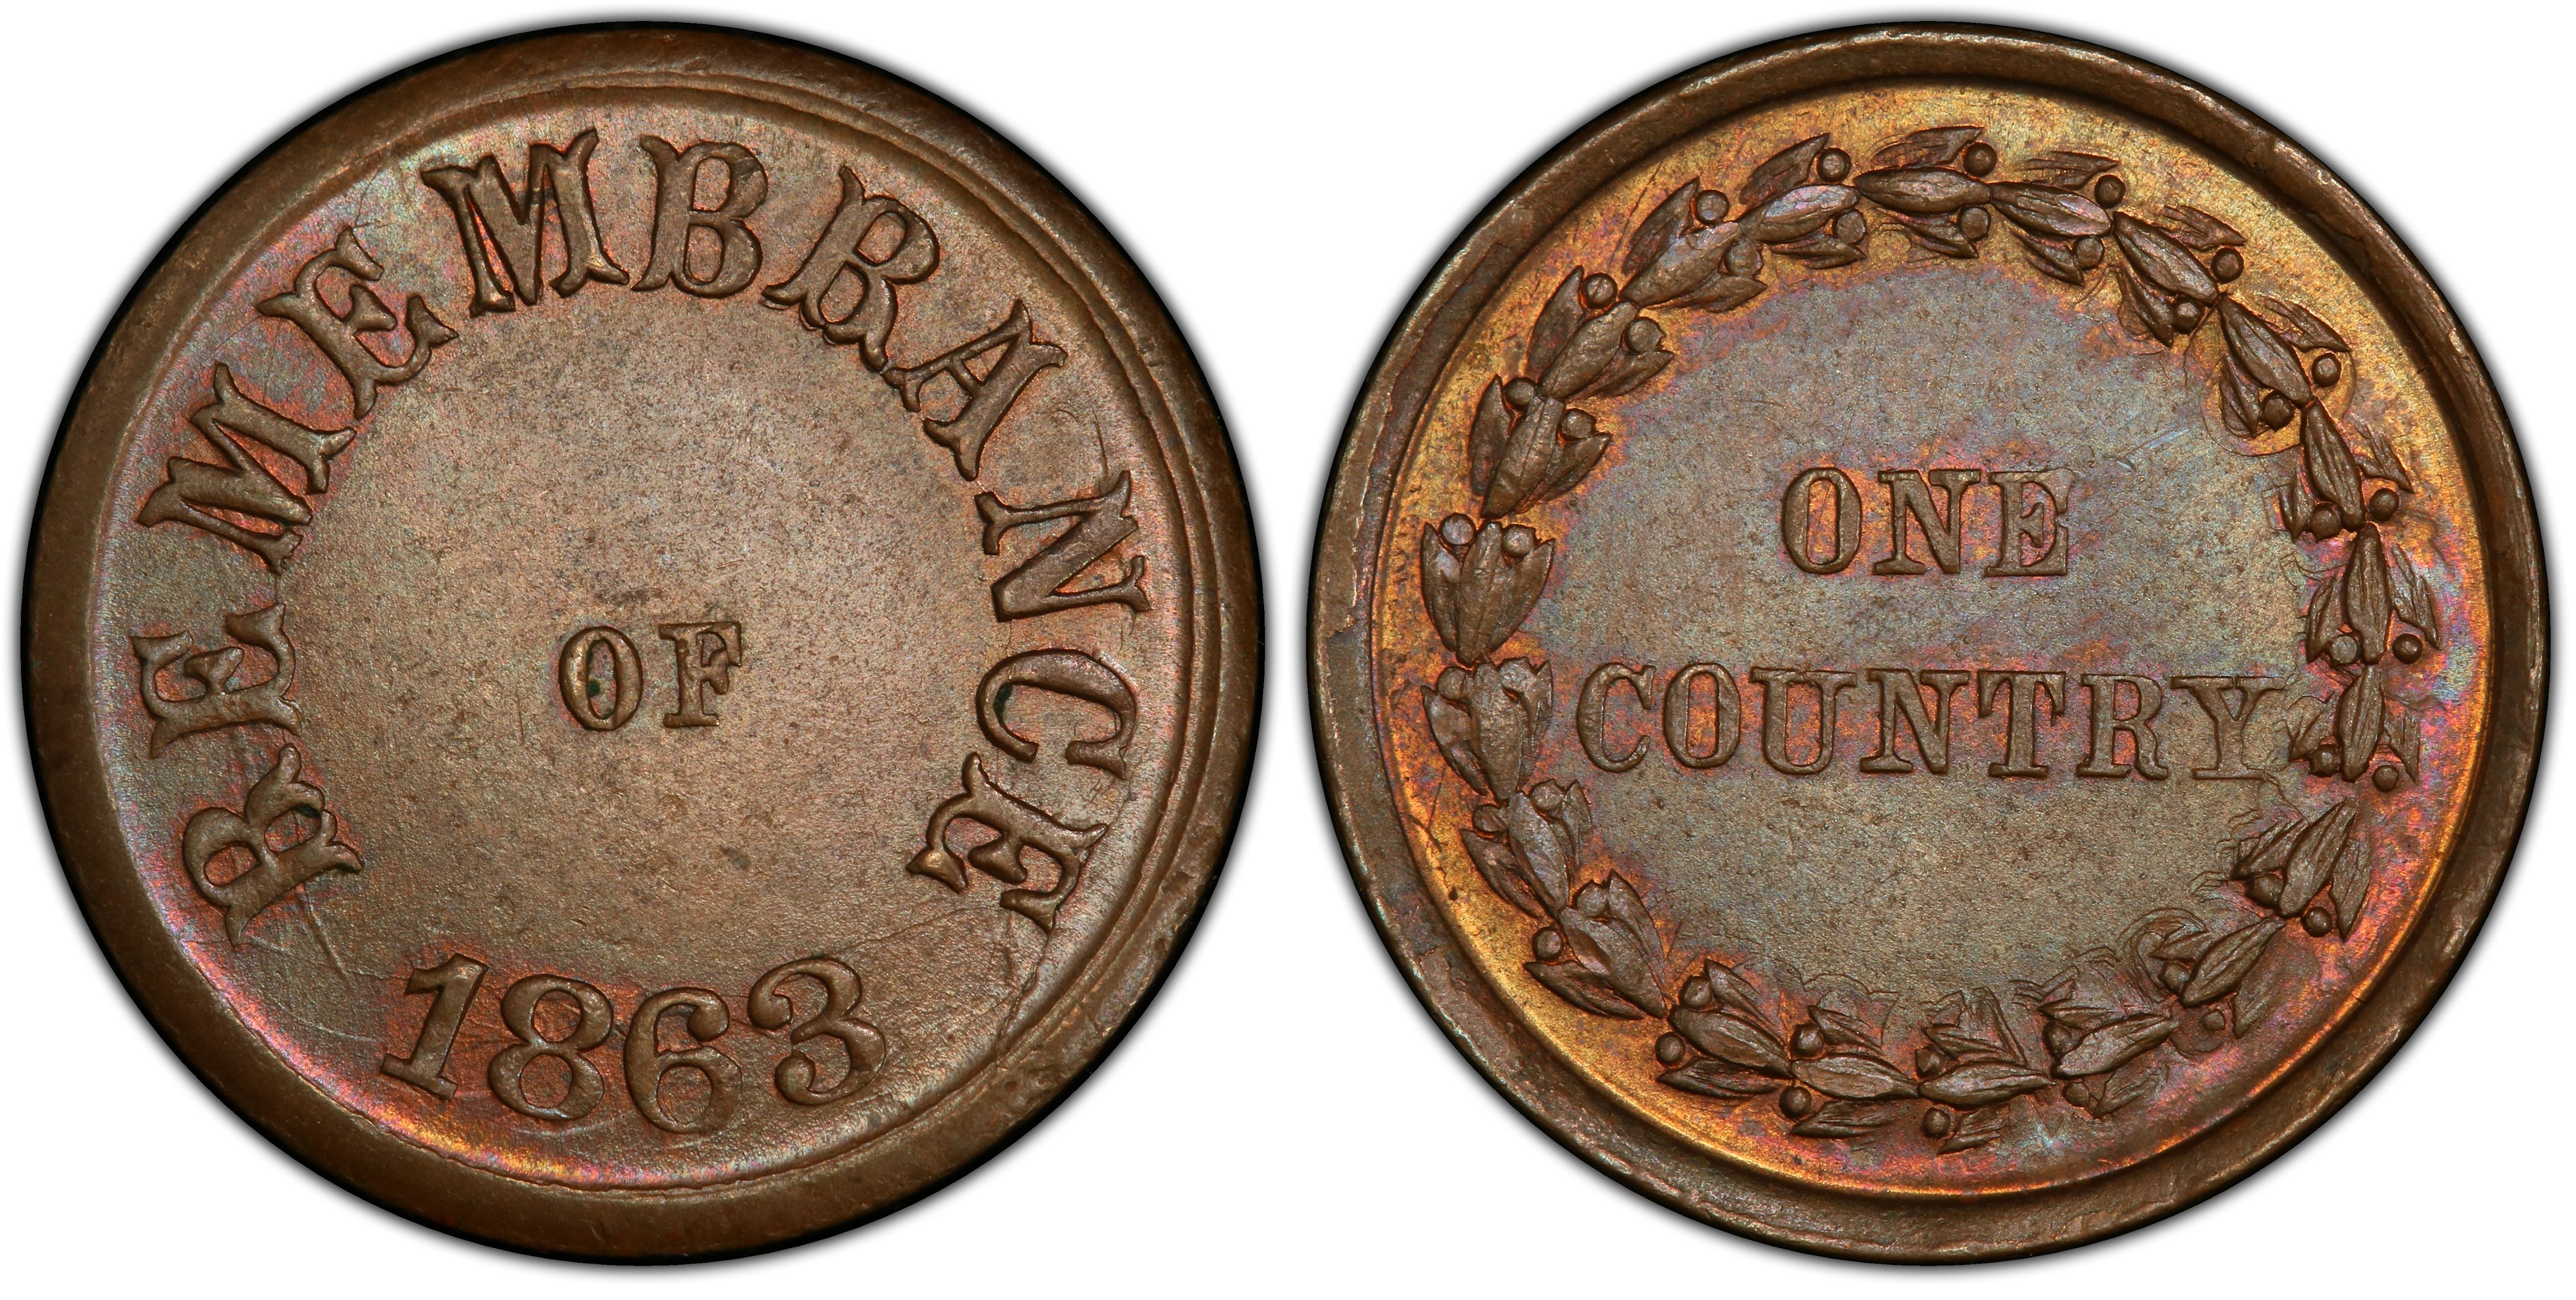 Country Tokens